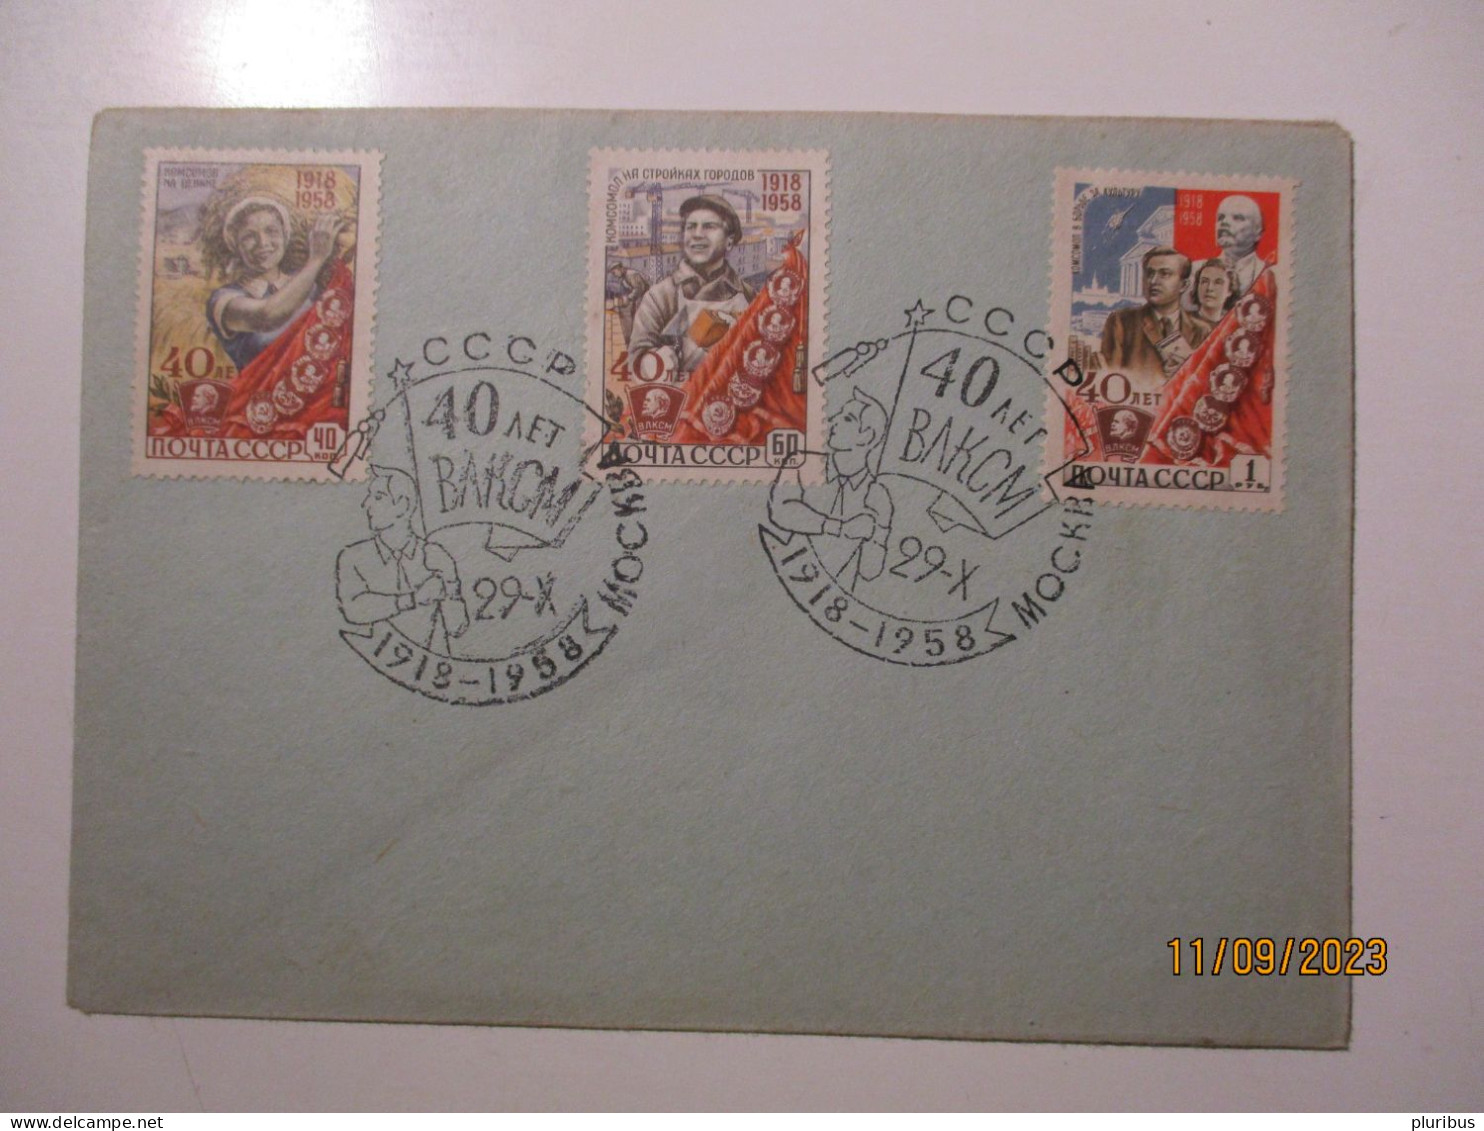 USSR RUSSIA MOSCOW 1958 YOUNG COMMUNIST KOMSOMOL ANNIVERSARY  ,   SPECIAL CANCEL COVER   , O - Covers & Documents